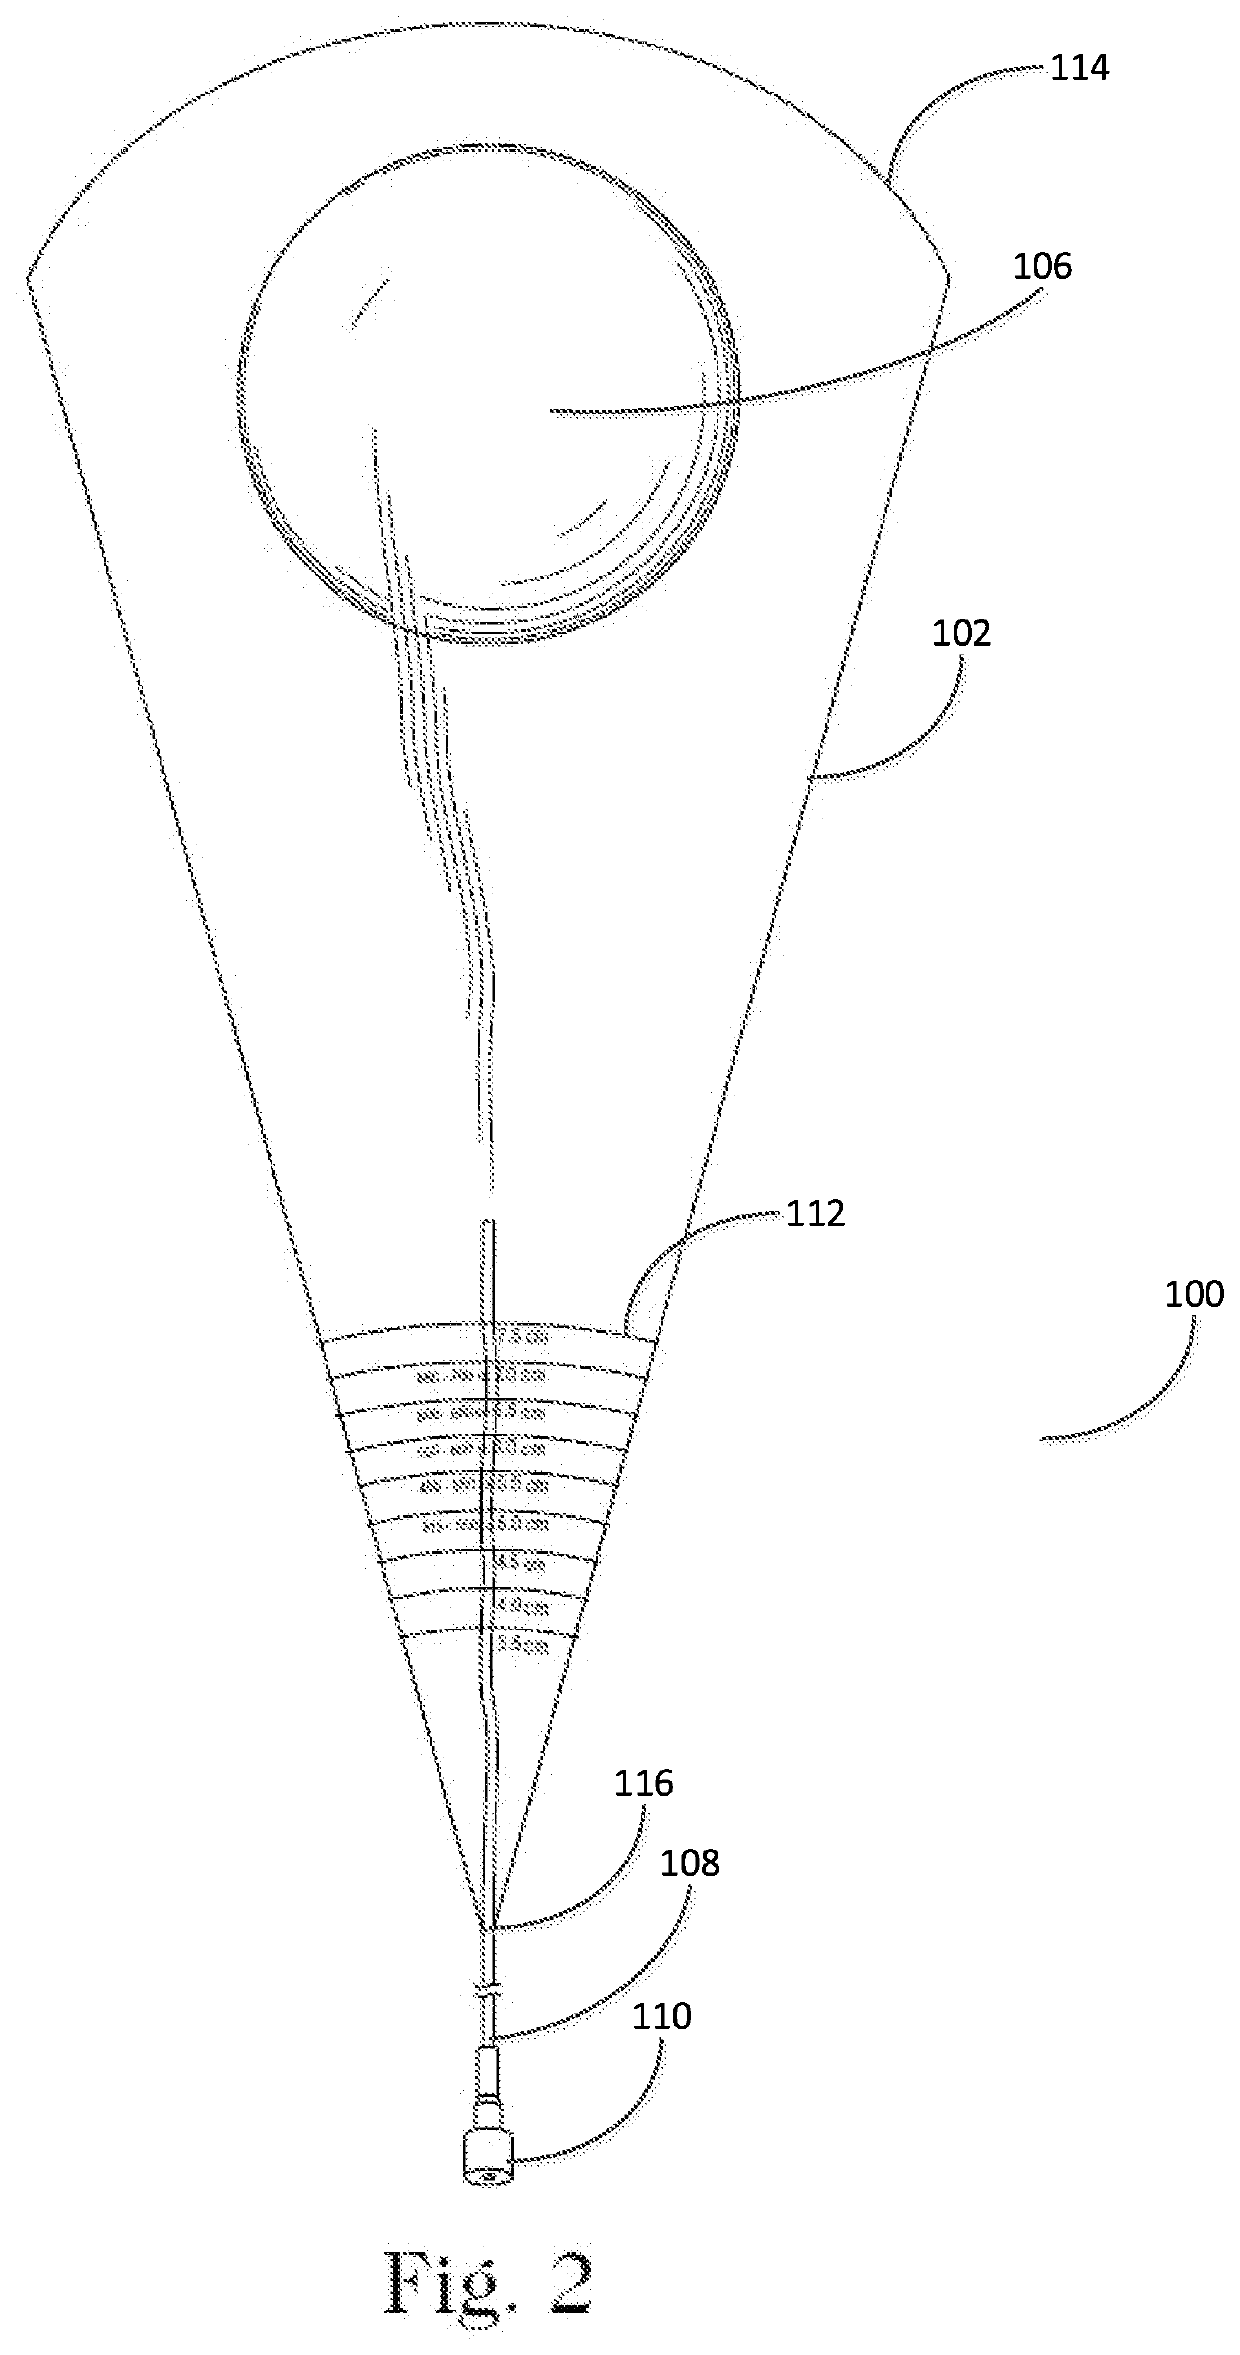 Closed funnel for the delivery of a prosthetic implant